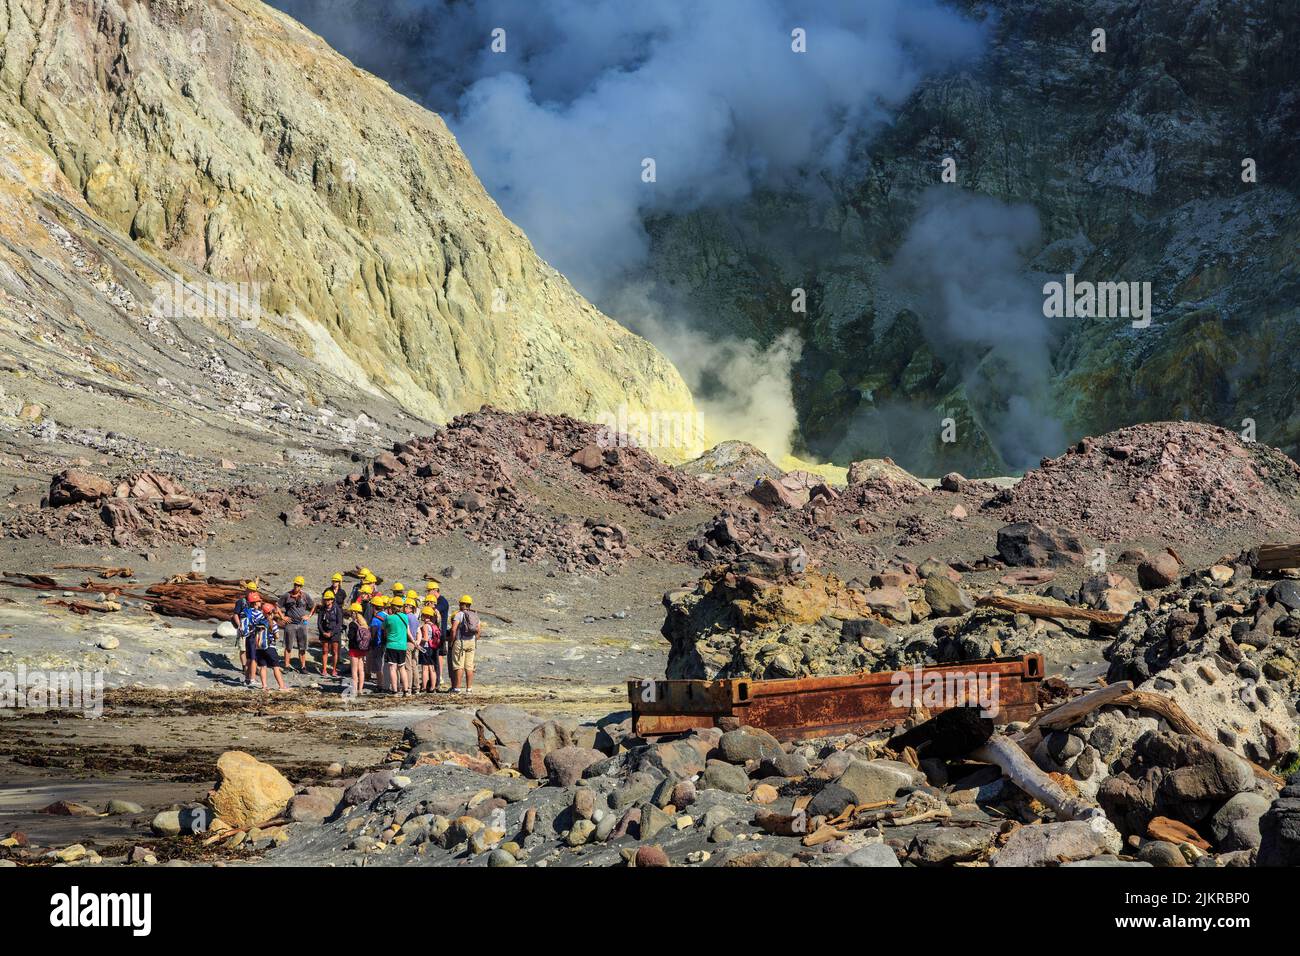 The steaming volcanic landscape of White Island, New Zealand. A party of tourists is visible to the left Stock Photo